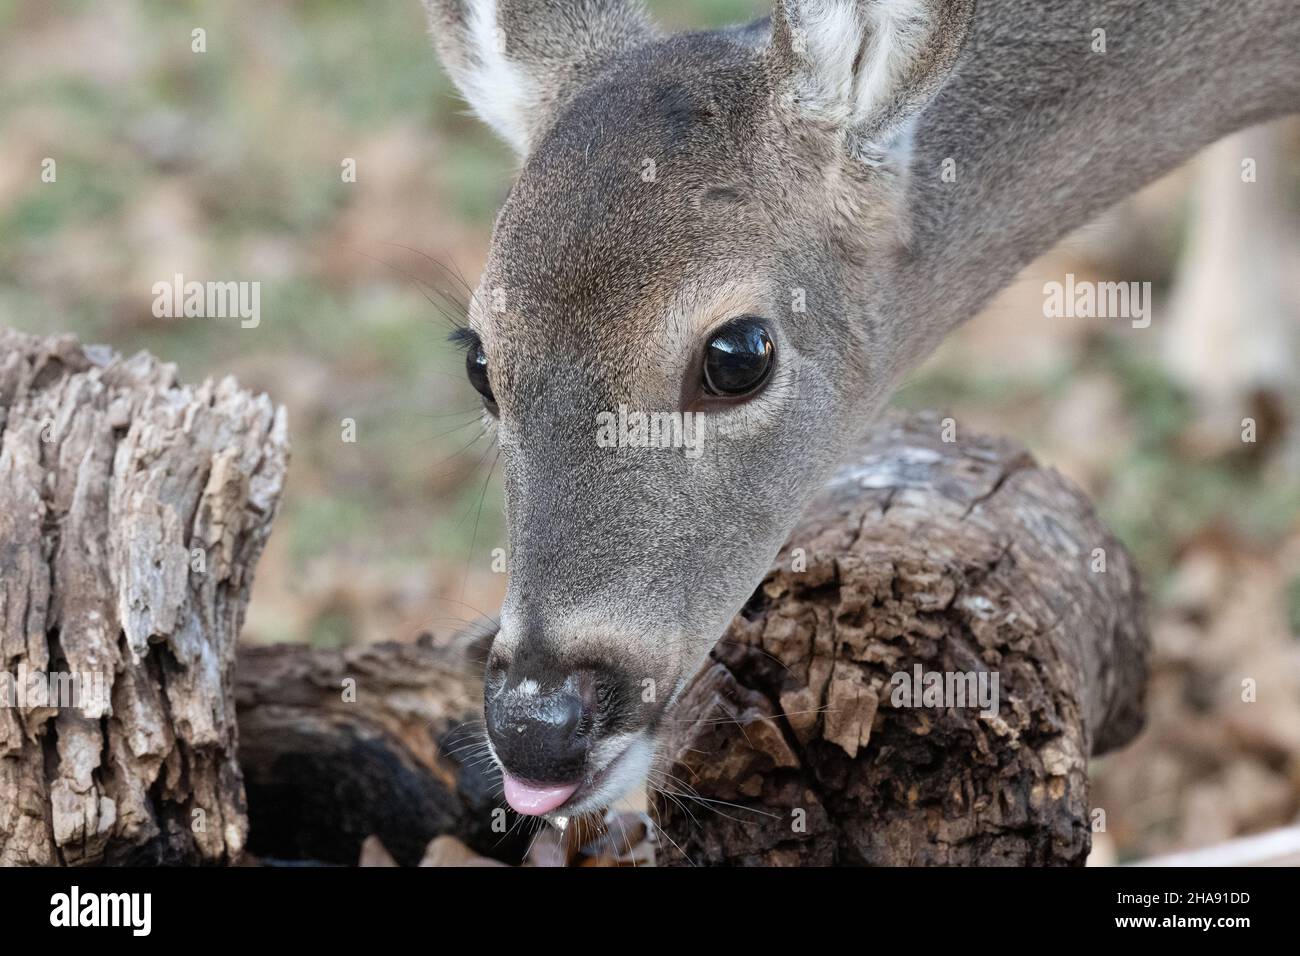 Closeup of young white-tailed deer Odocoileus virginianus while drinking.  White-tailed deer are common in many eastern and central areas of the US. Stock Photo